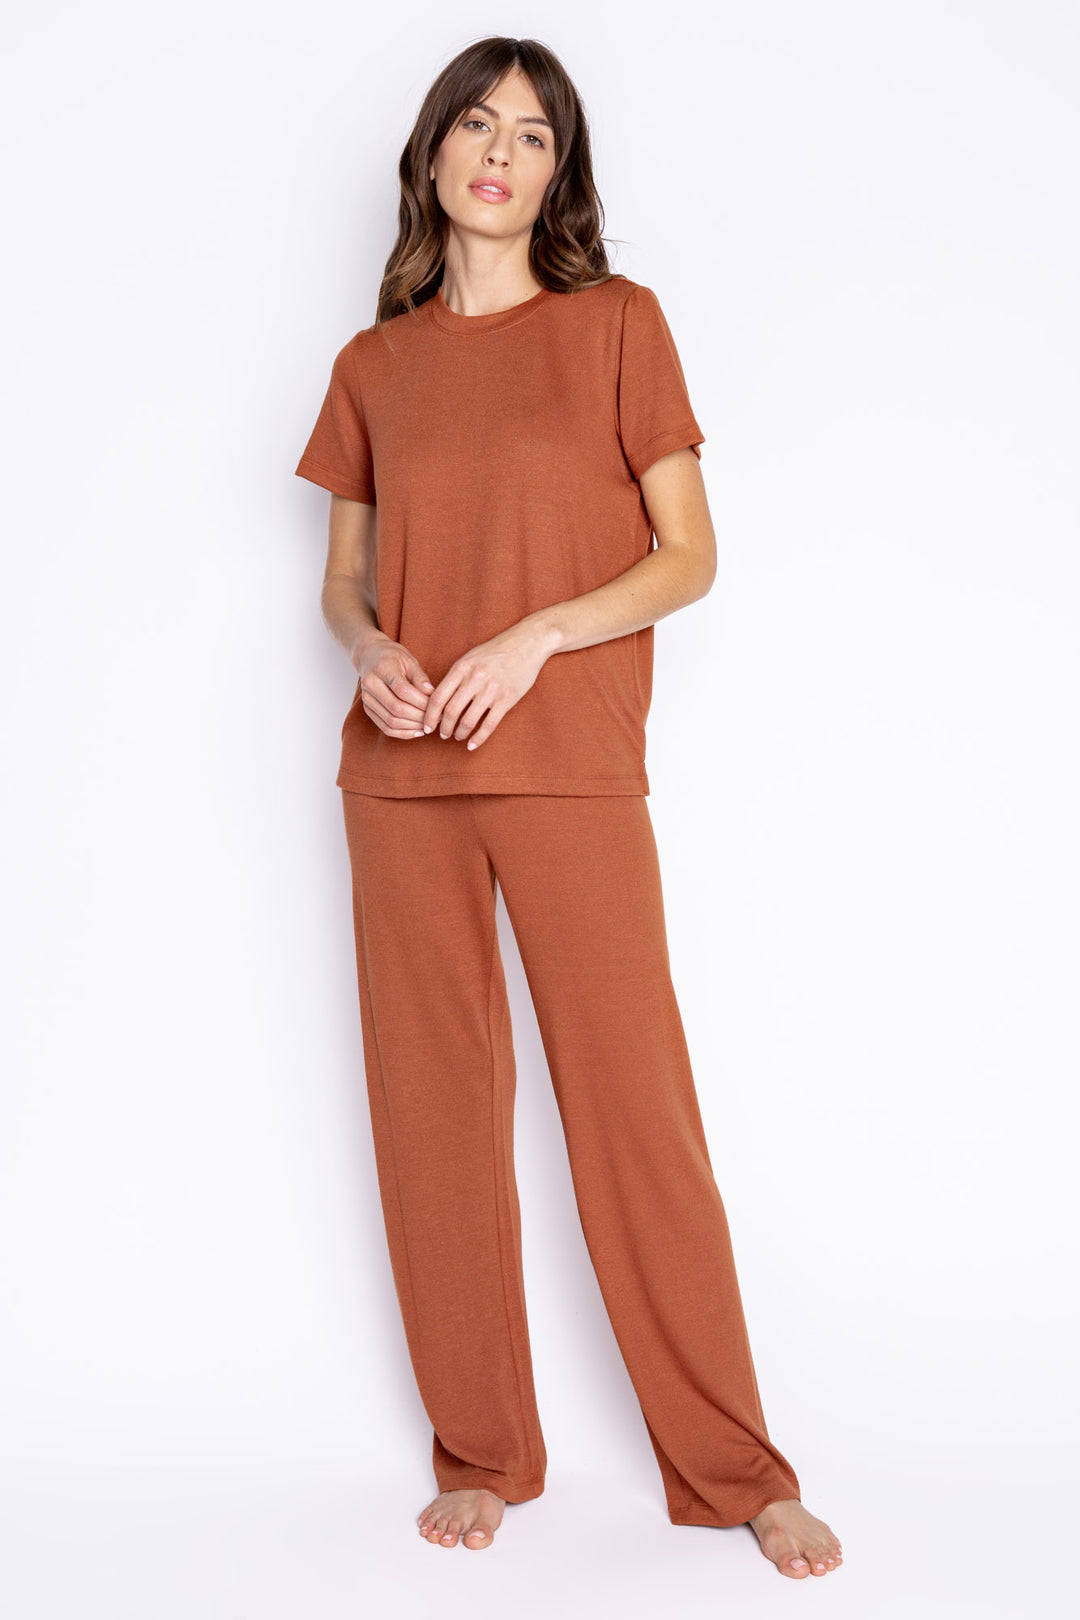 Pant and tee port lounge set in REPREVE® certified recycled fabric in ultra-fine jersey material. (6853539922020)